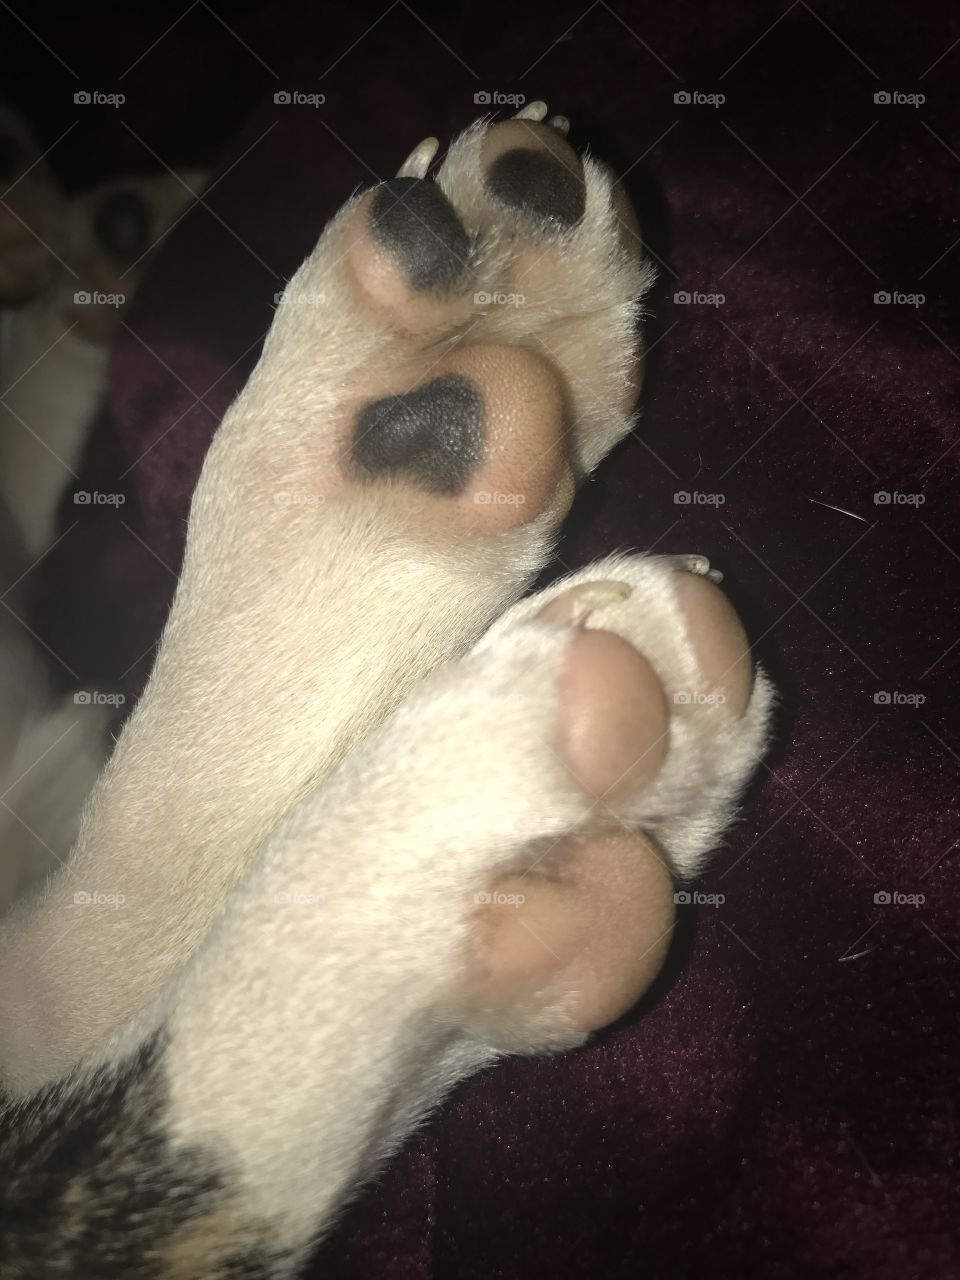 Spotted puppy paws. Pink and black two tone paws close up to appreciate dogs from a different angle!